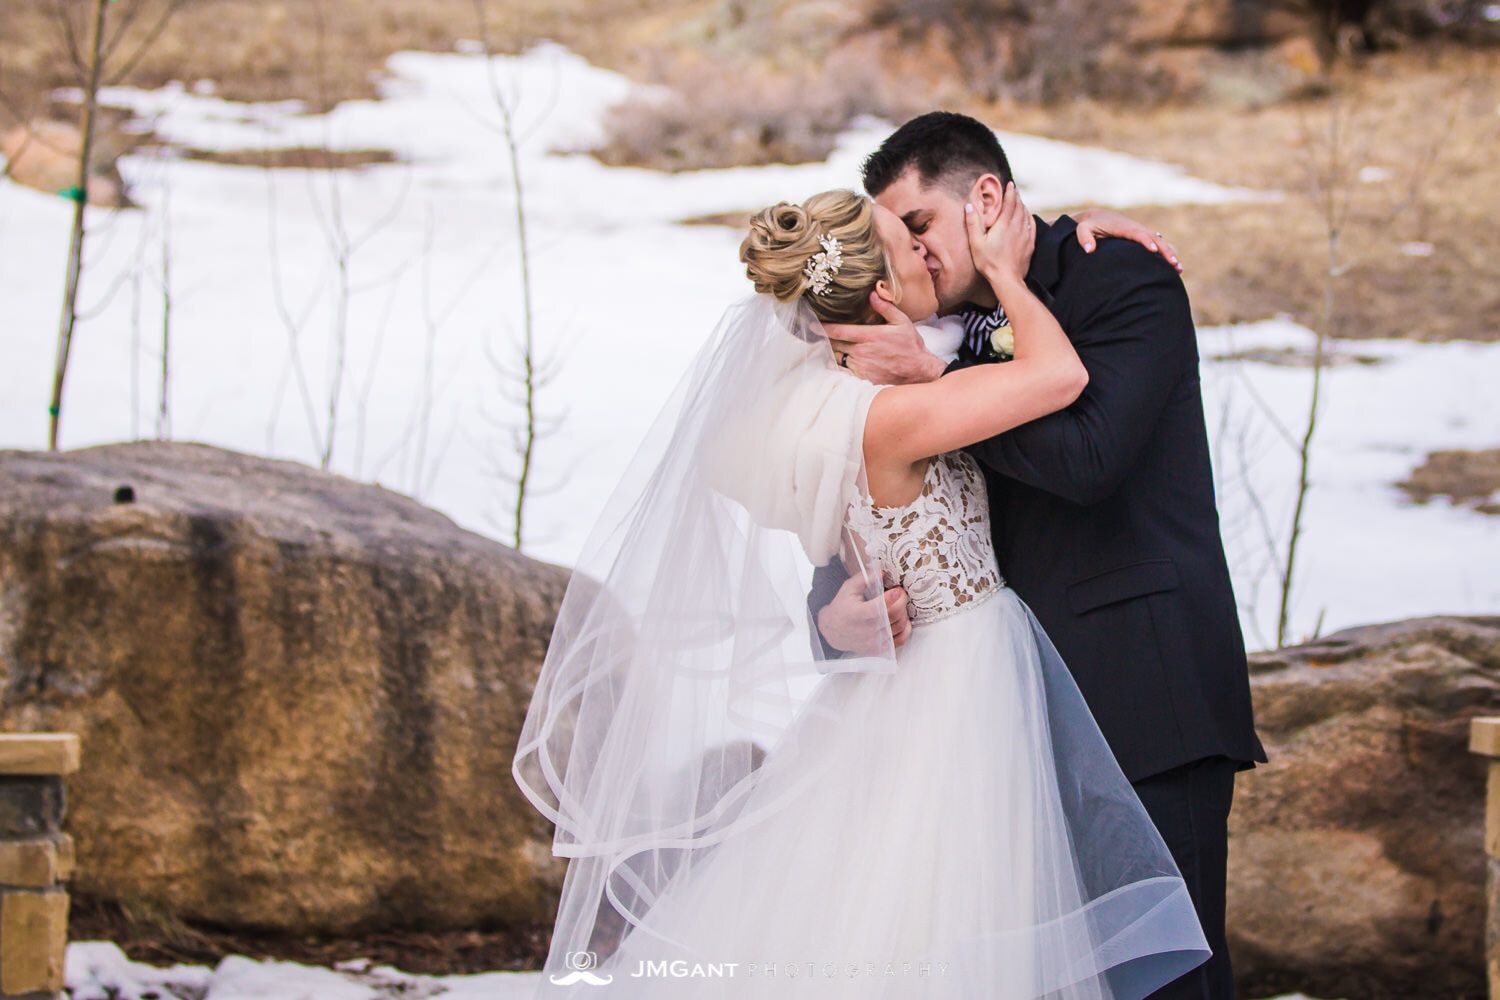  Stunning elegant wedding at the Della Terra Mountain Chateau in Estes Park Colorado. Photographed by Jared M. Gant of JMGant Photography. 